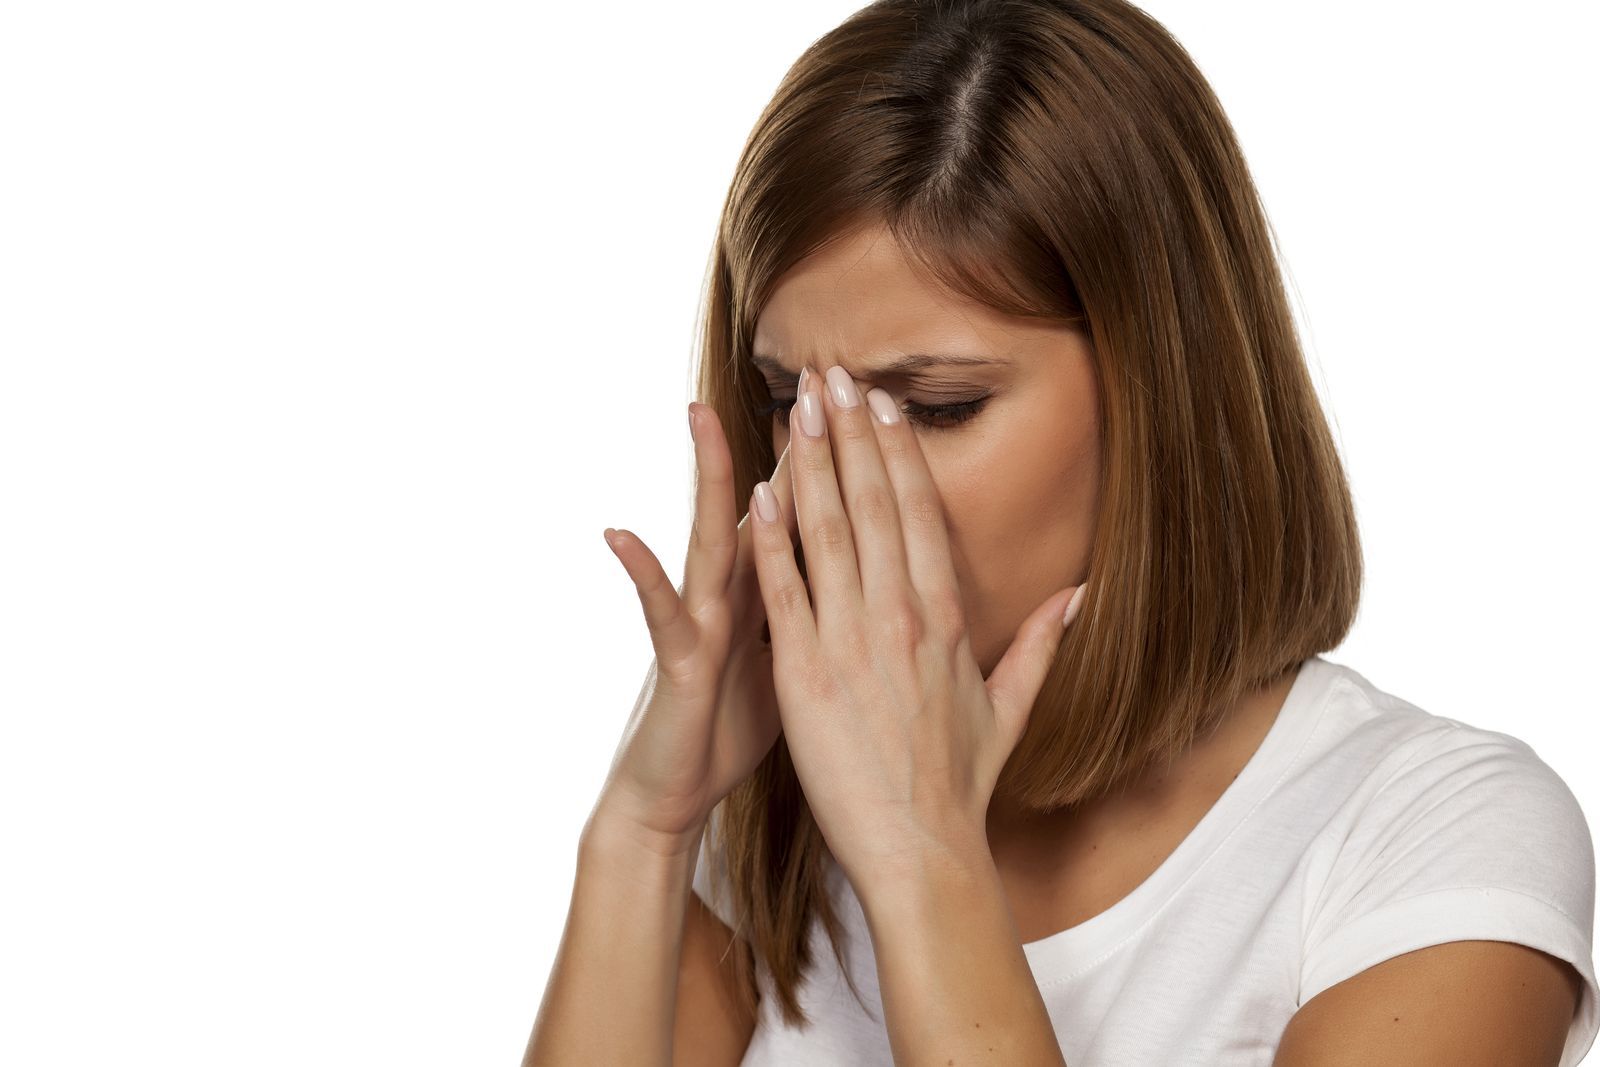 A woman suffering from facial pains due to sinusitis